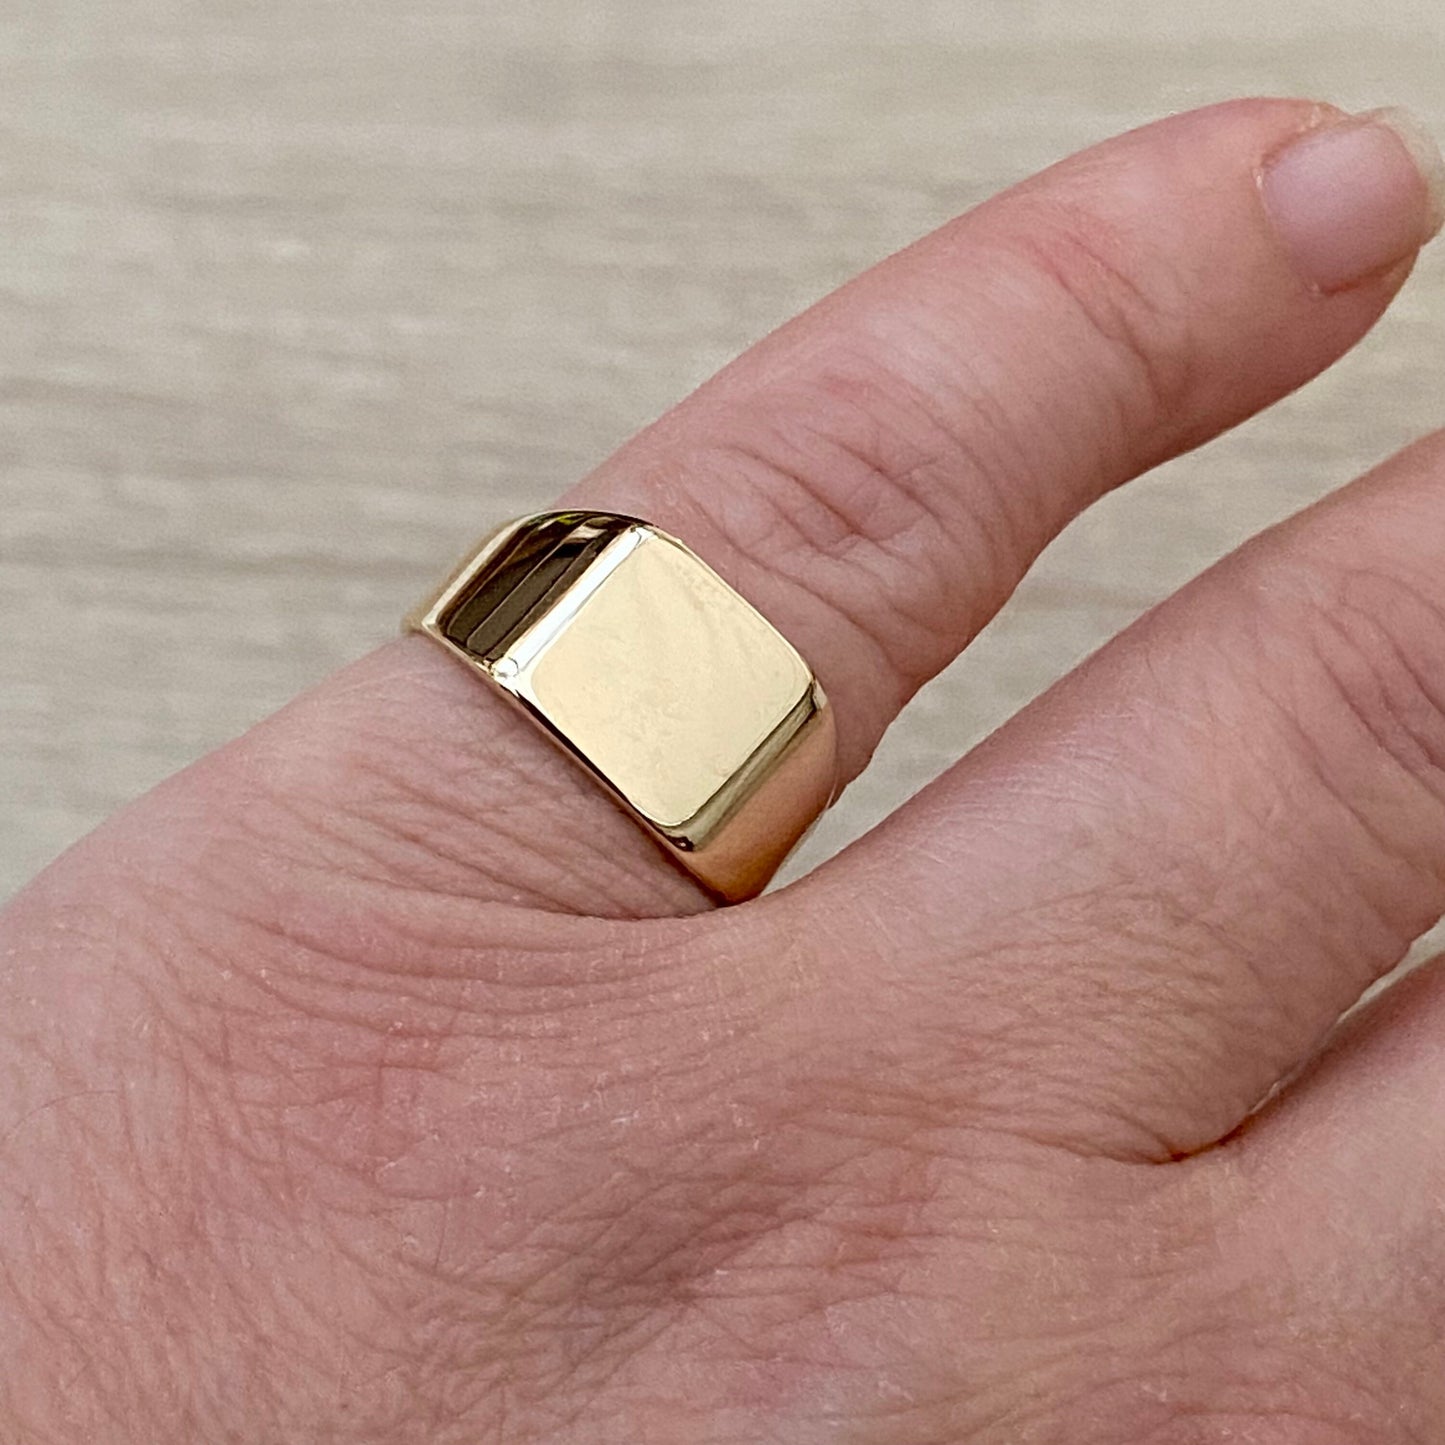 Vintage 9ct yellow gold square signet ring